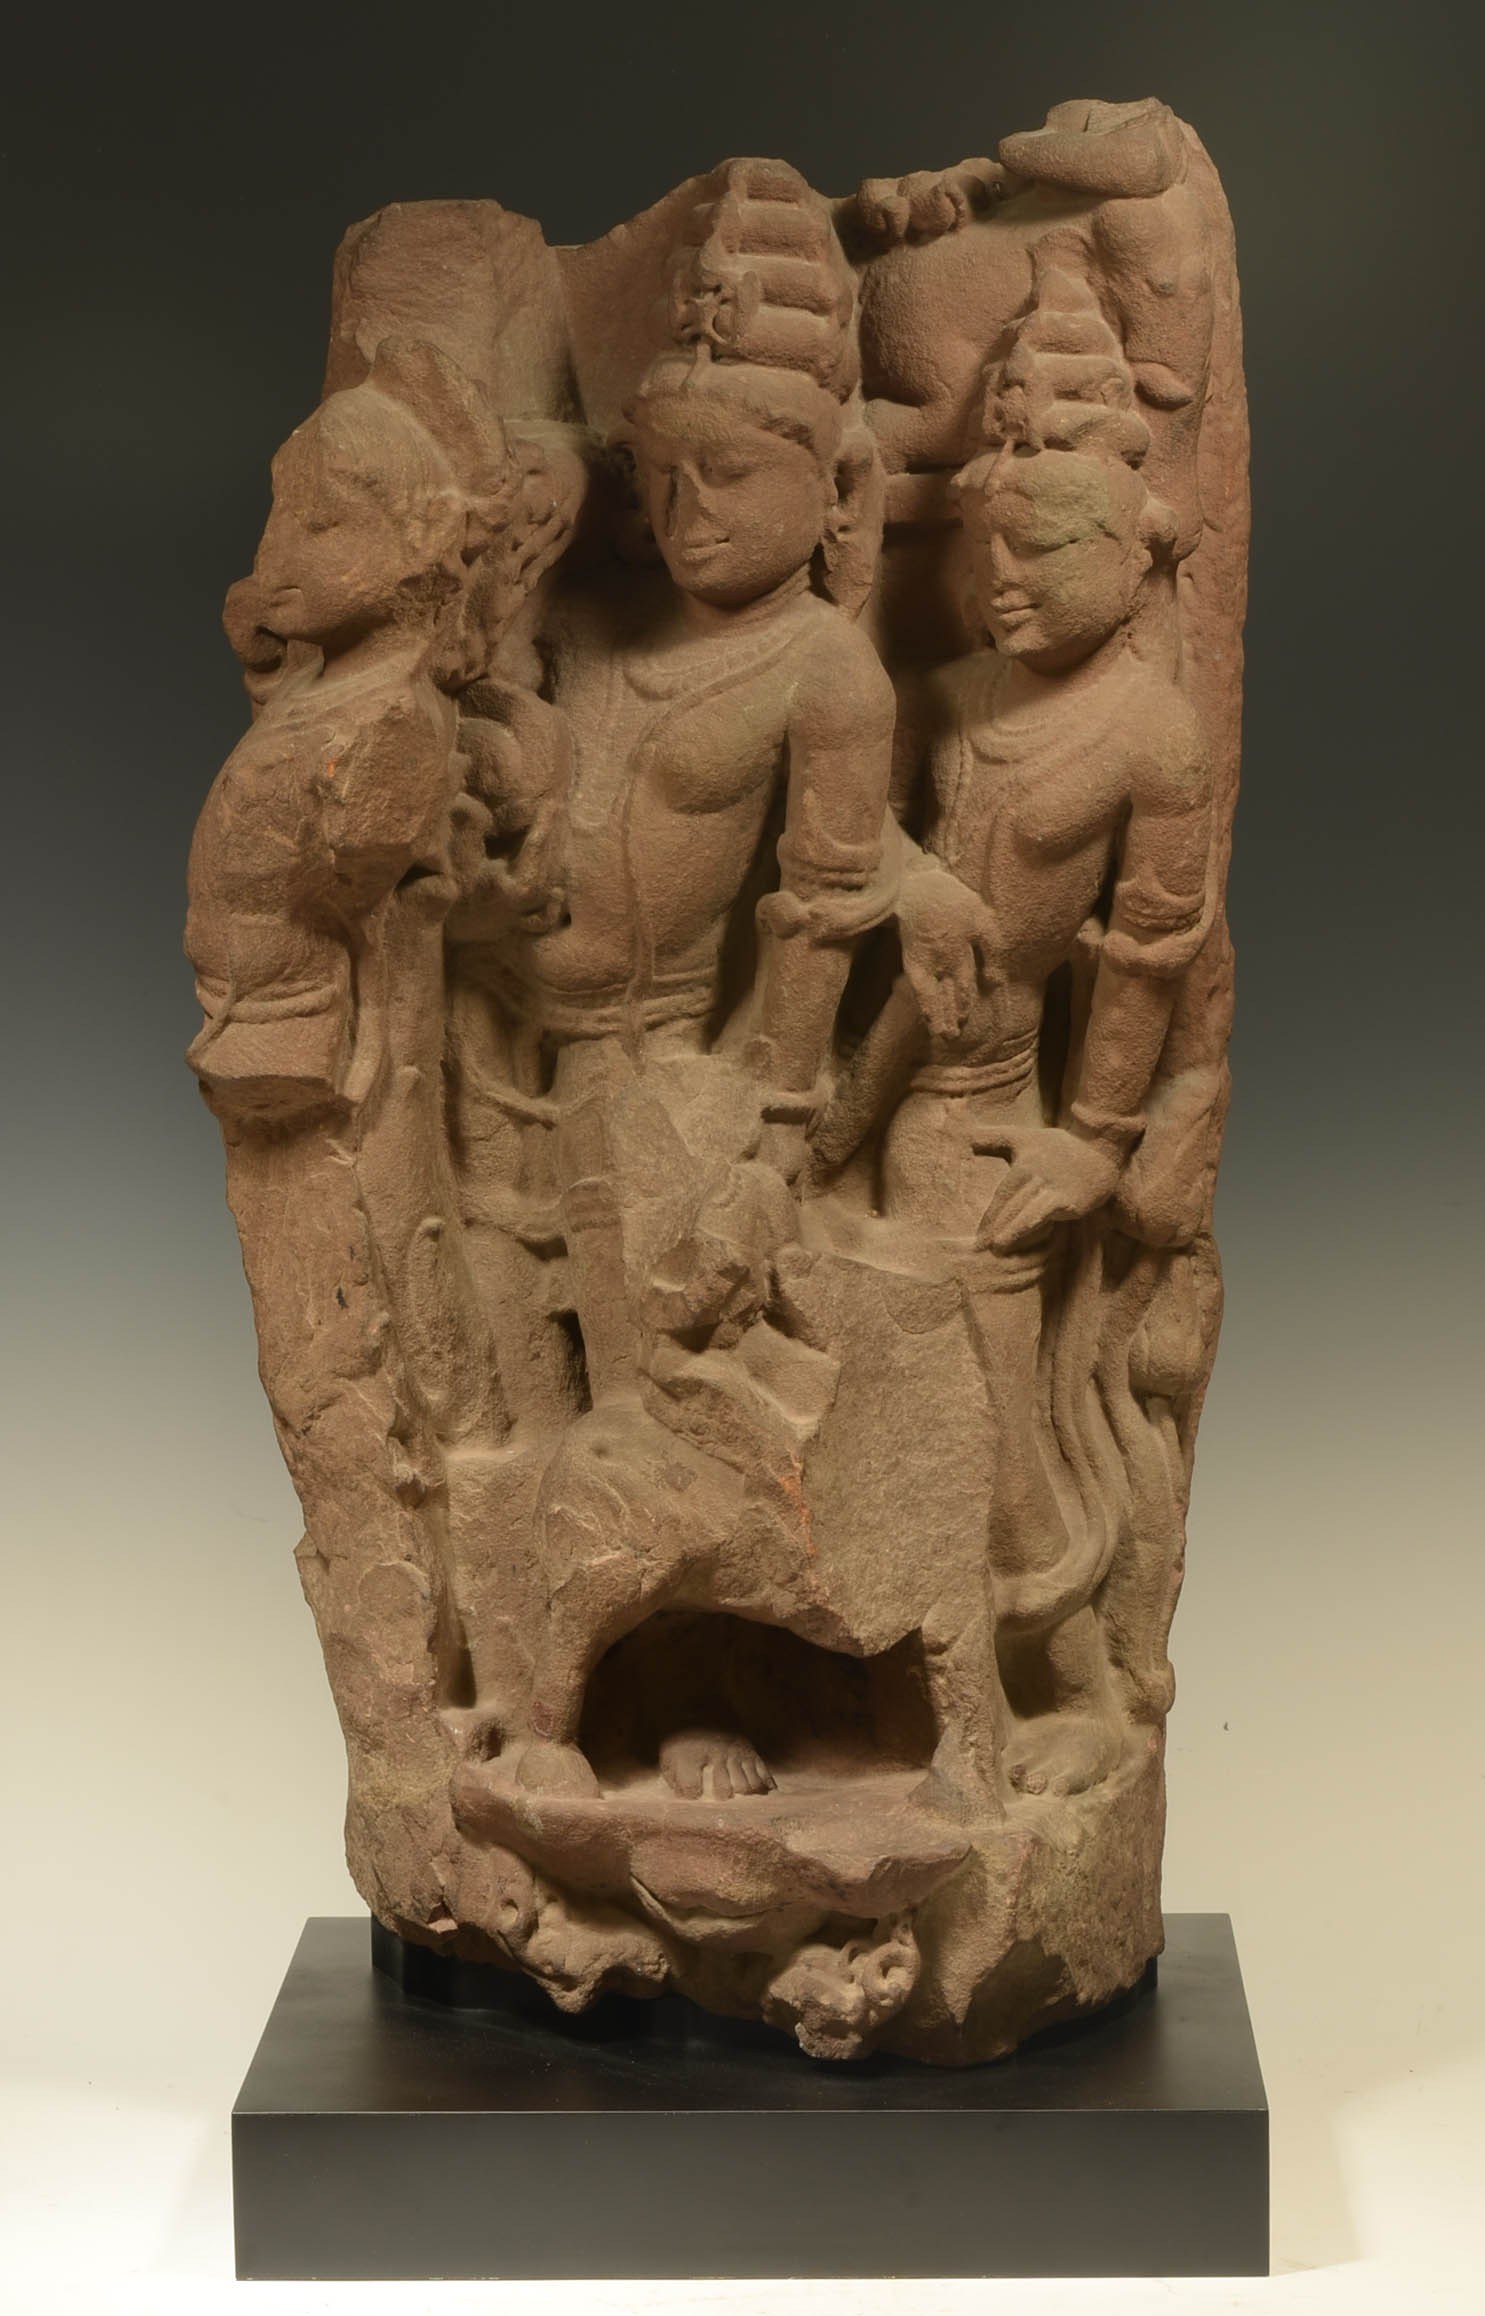 A survey of the Art of Ancient India